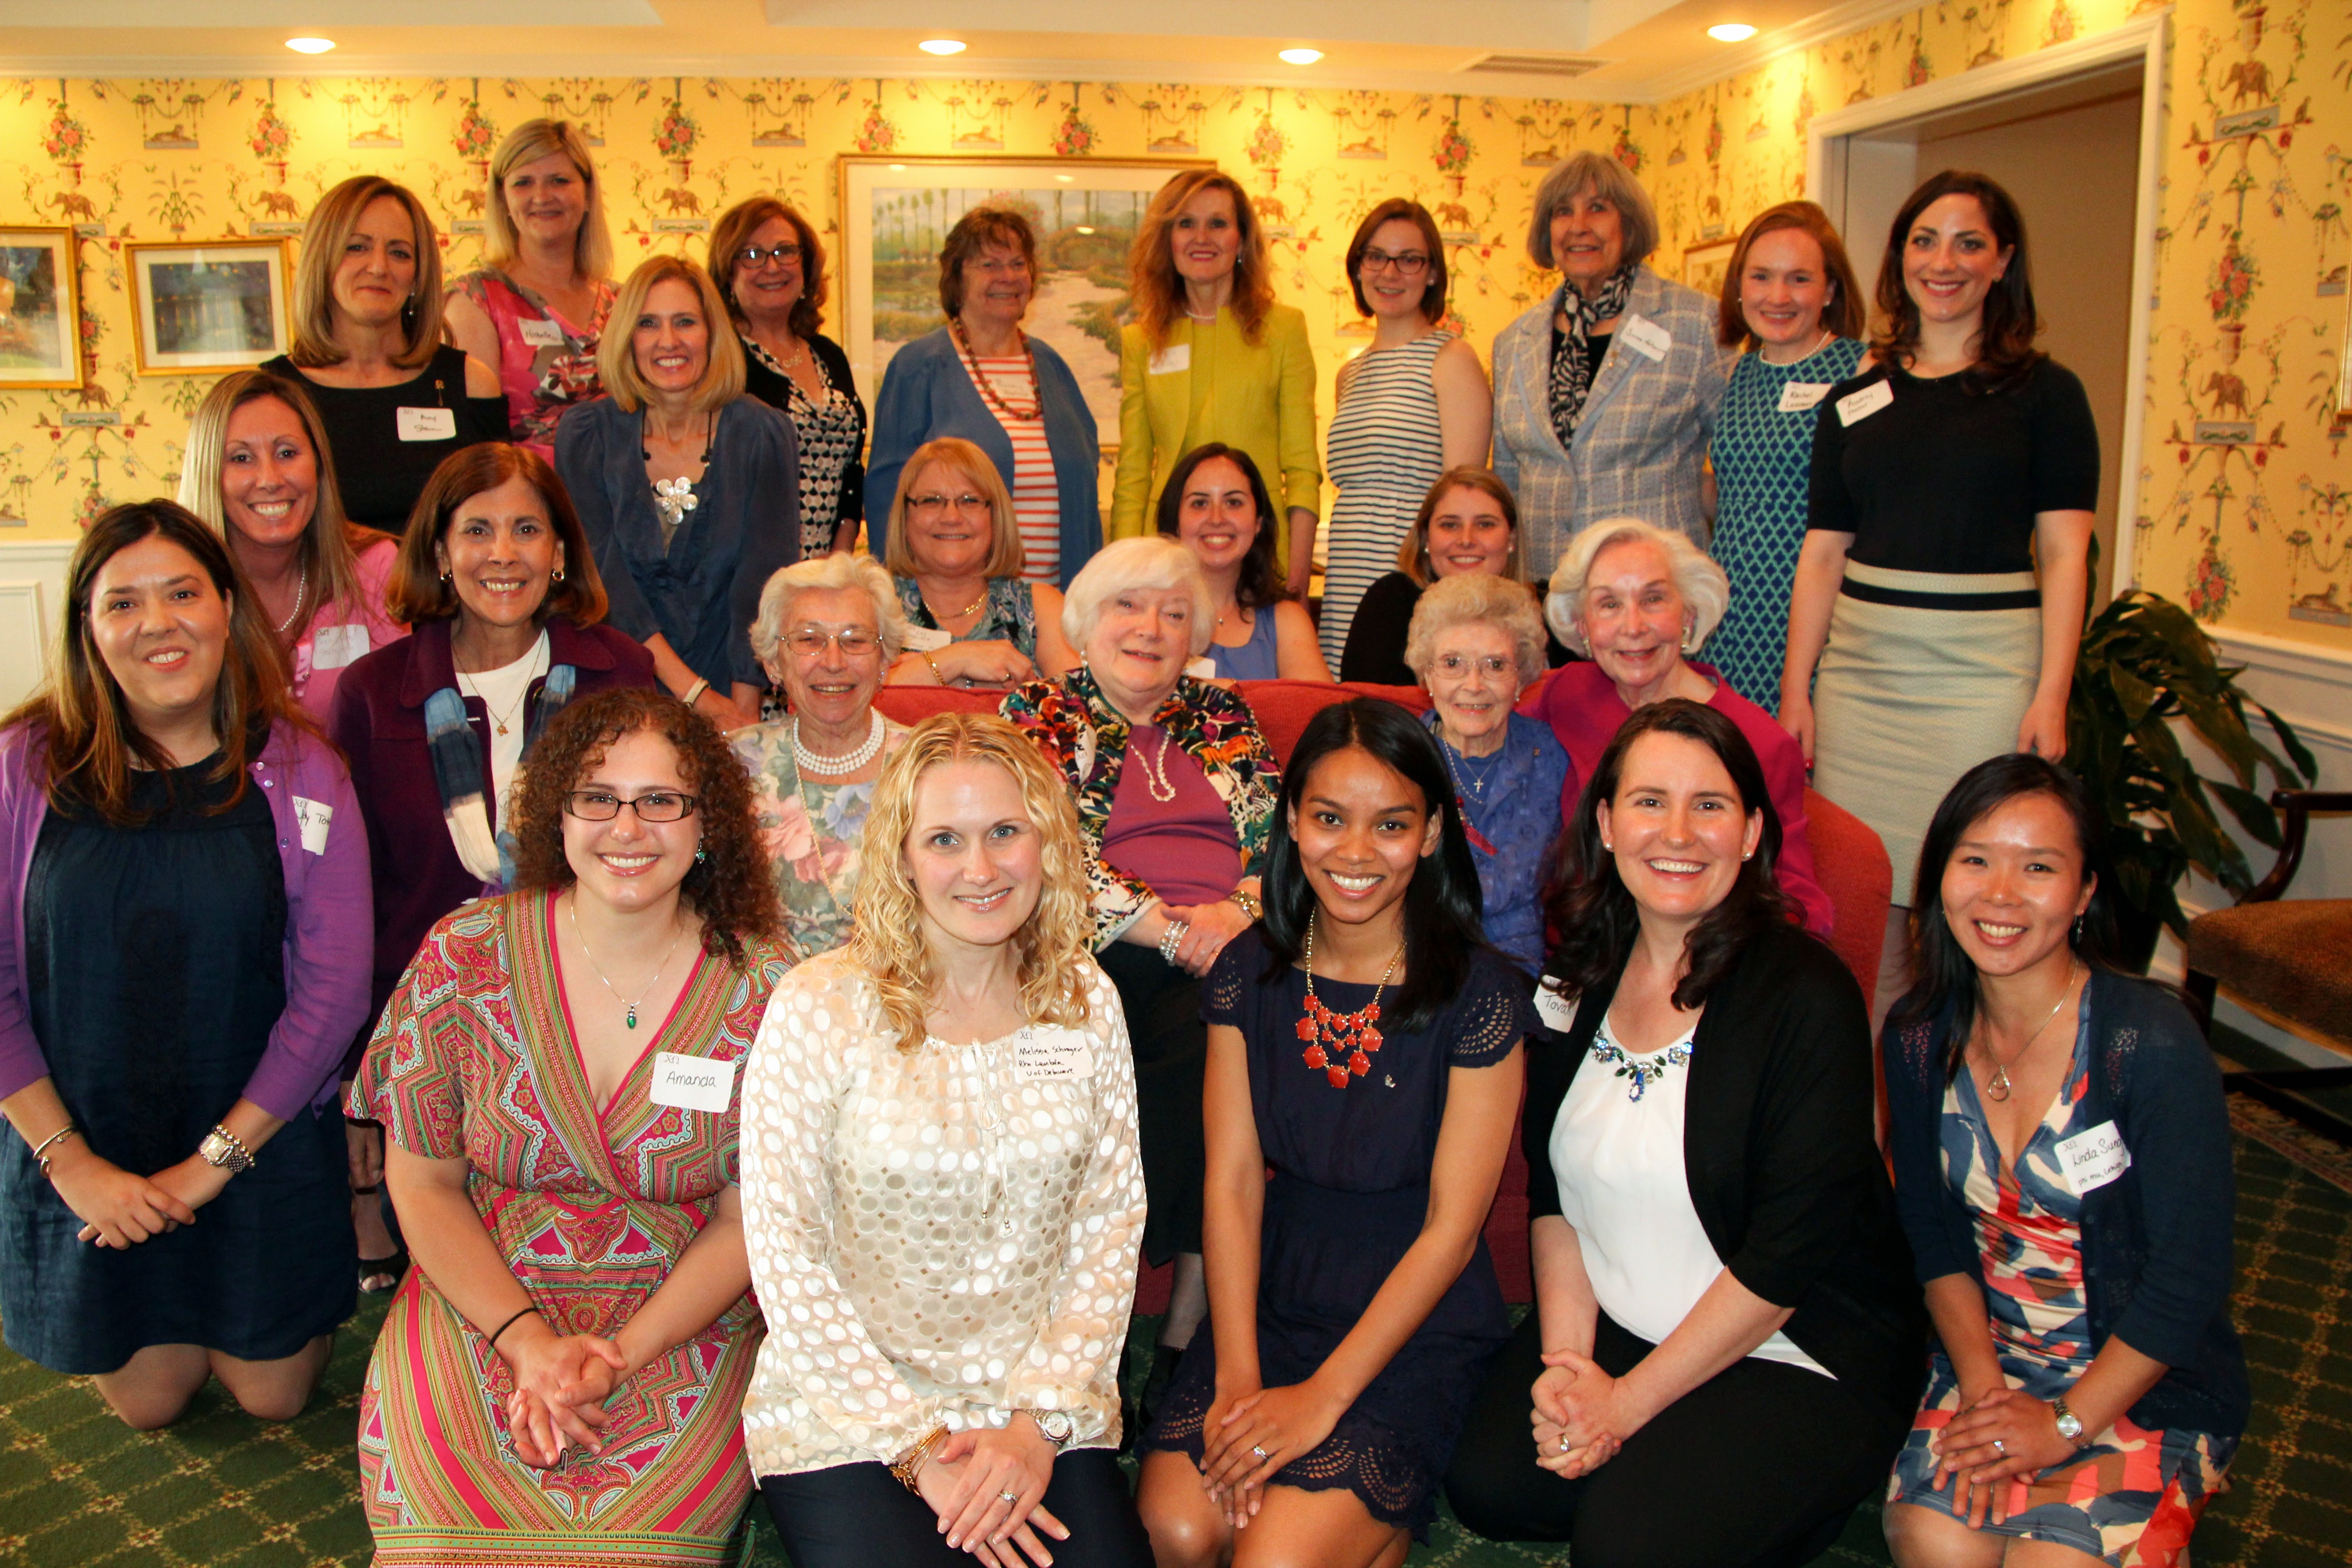 Northern New Jersey Alumnae Chapter of Chi Omega - Eleusinian Luncheon 2014 - Photo Courtesy of Linda Sung